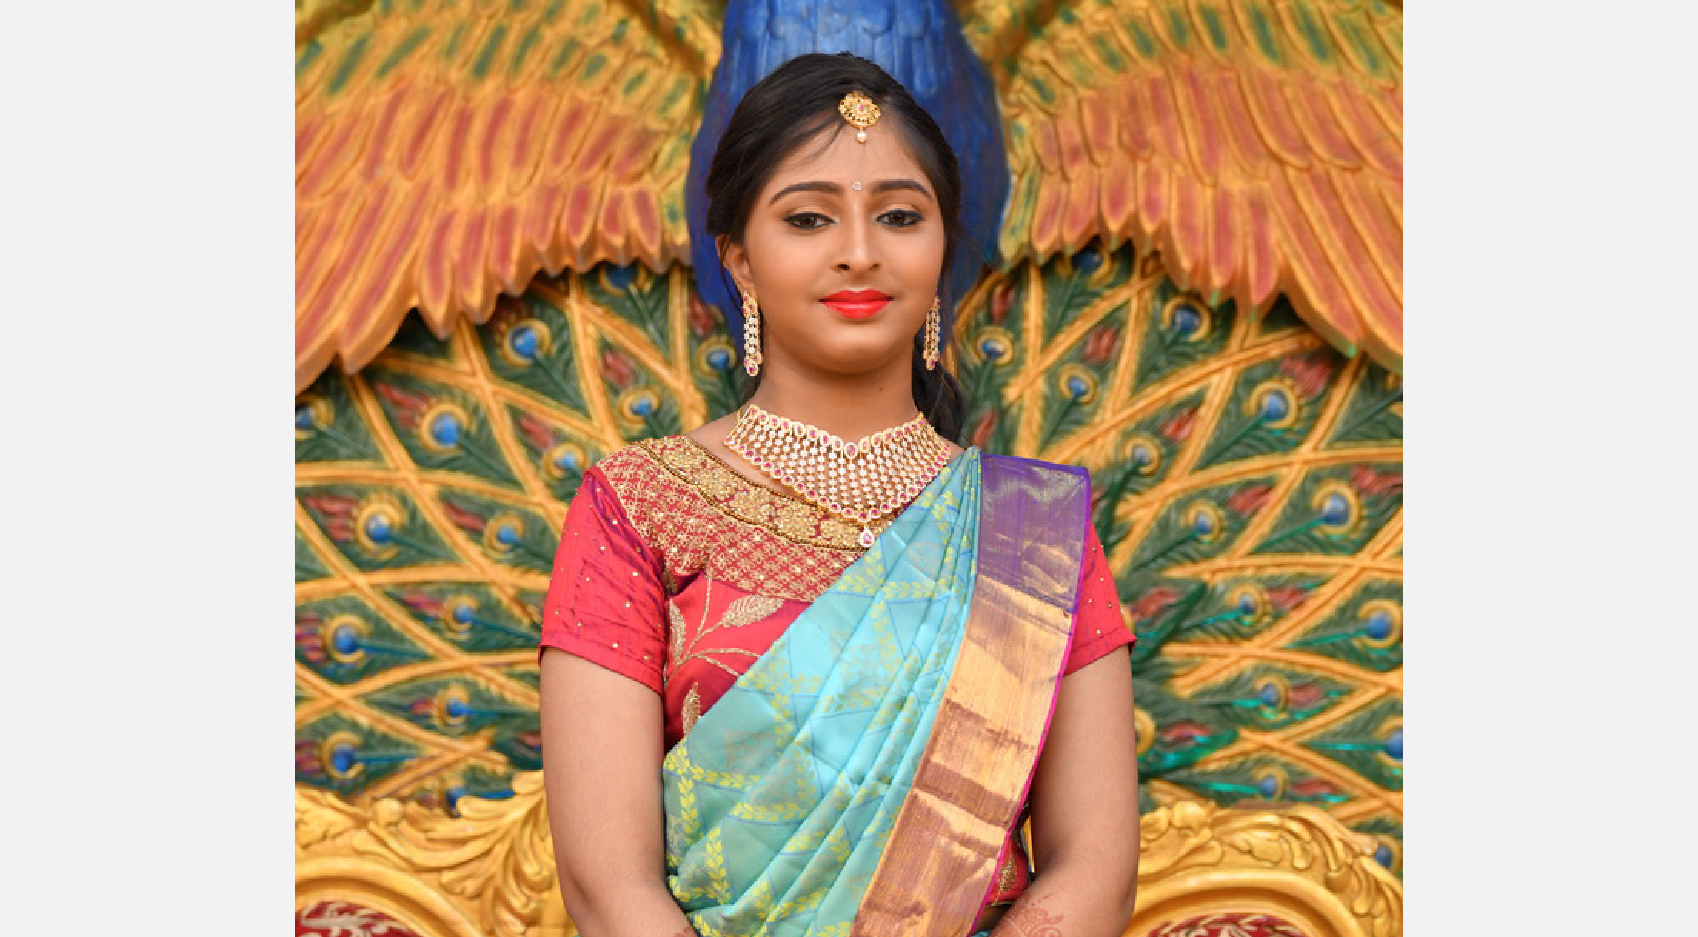 wonderful article If you want any Bridal Makeup services check (JB MAKEUPS  in Chennai) She is Best in Saree Draping, Bridal Makeup and her work is  also great you can get some